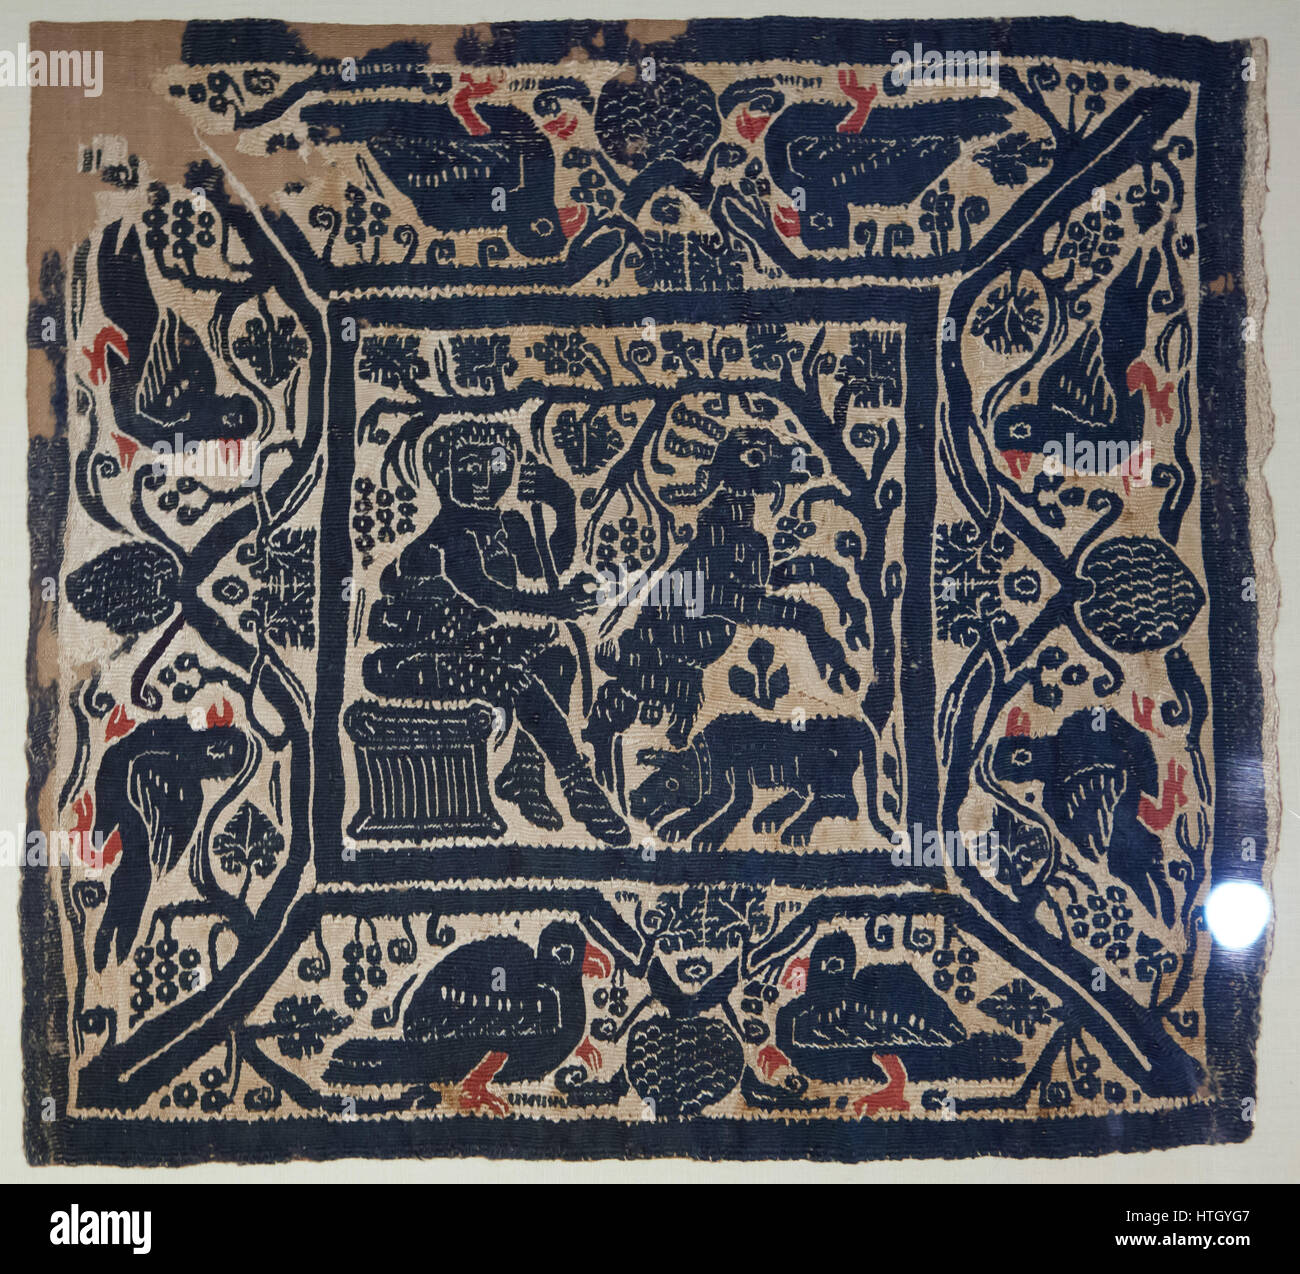 Bucolic scene framed by doves and bunches. Coptic textile from 5-6th century AD on display in the Staatliches Museum Agyptischer Kunst (State Museum of Egyptian Art) in Munich, Bavaria, Germany. Stock Photo